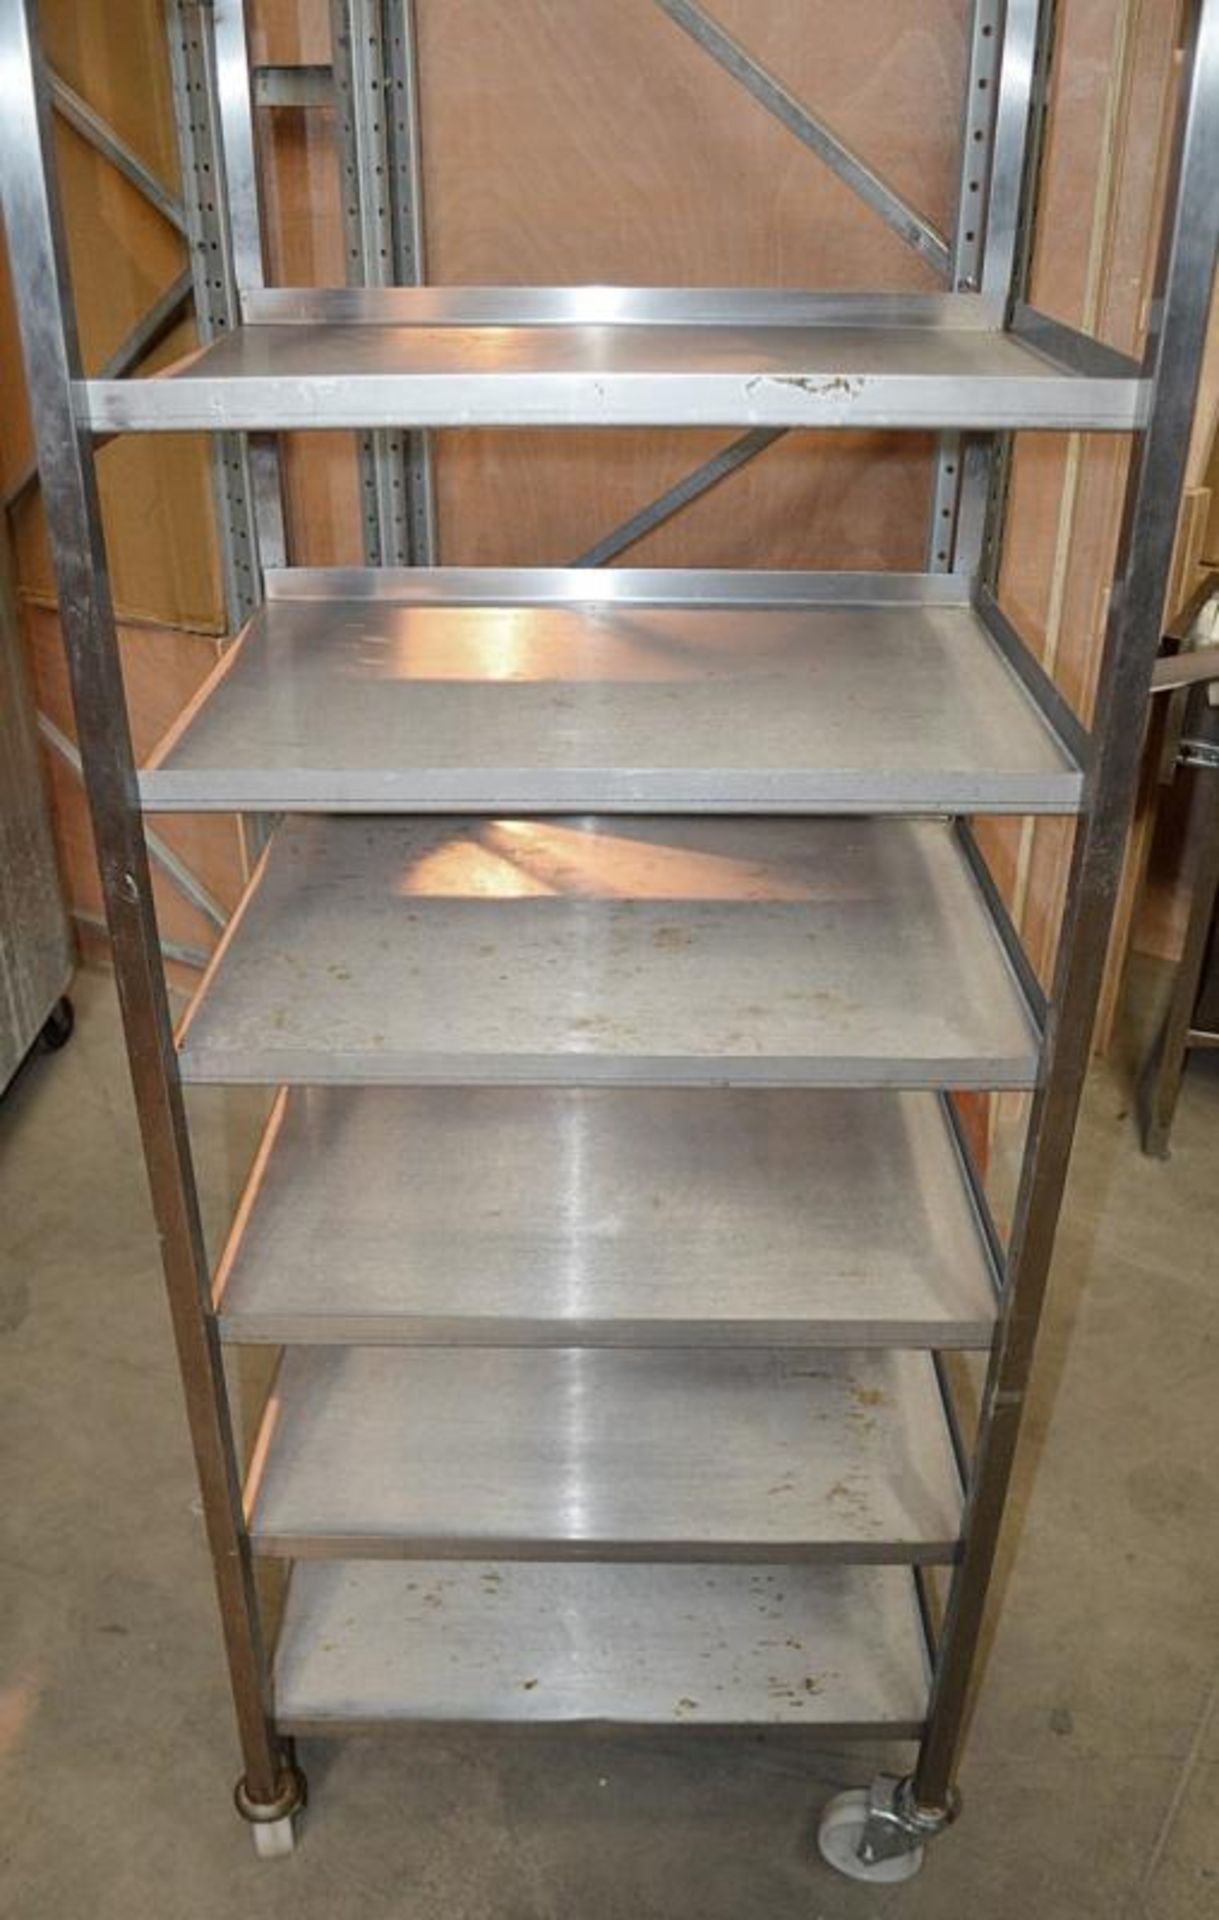 1 x Stainless Steel Commercial Kitchen 7-Teir Trolley On Castors - Dimensions: H185 x W54 x D64cm - - Image 4 of 4